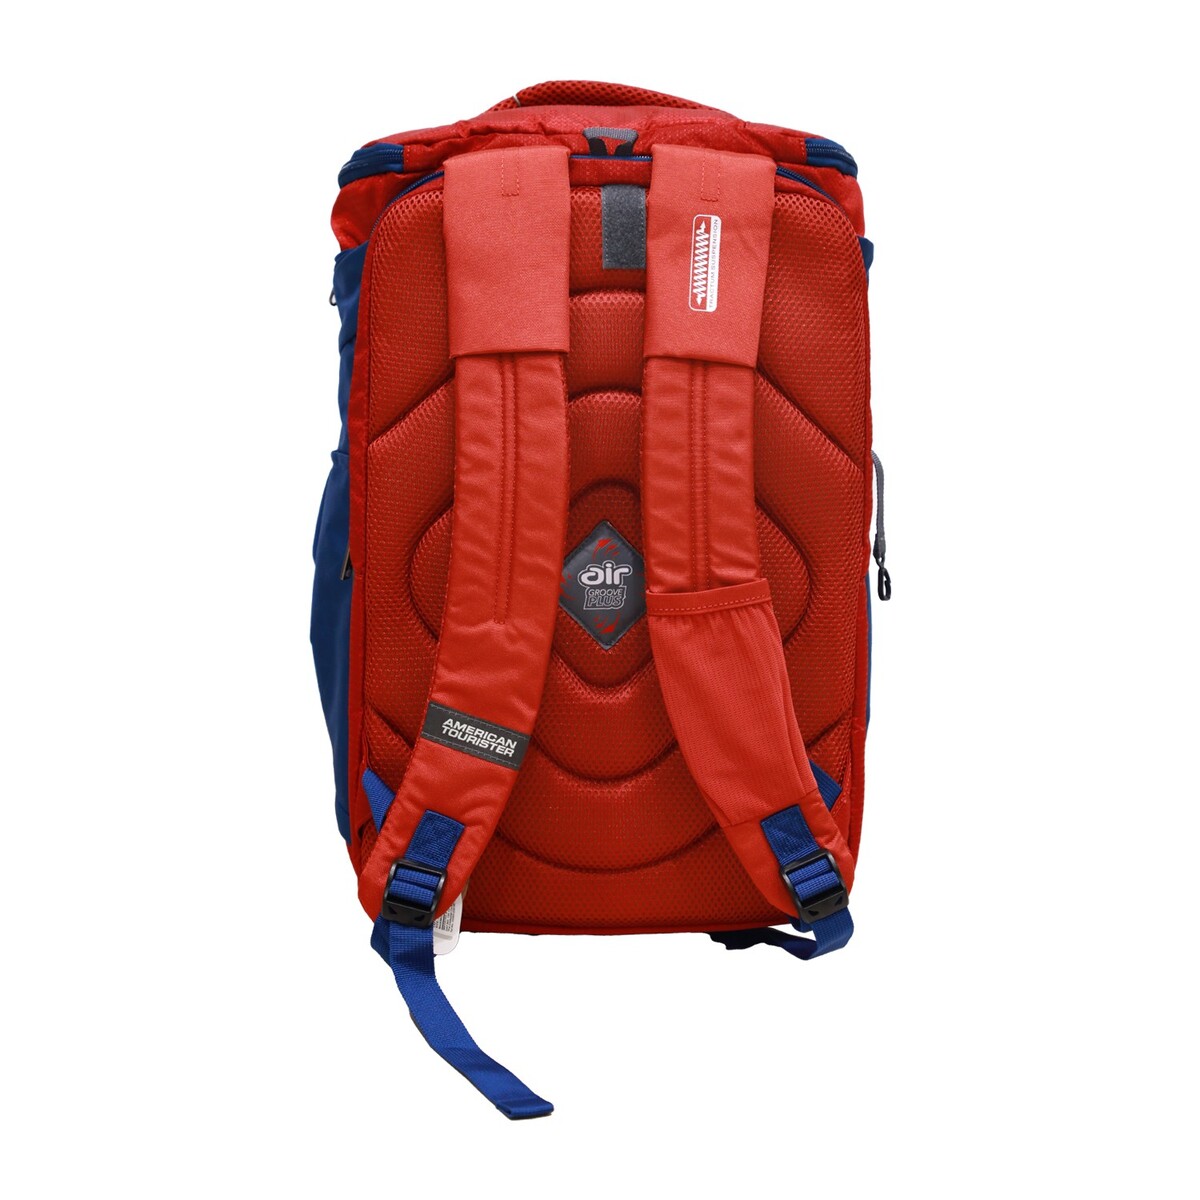 American Tourister Laptop Backpack Spur 02 Dp Red